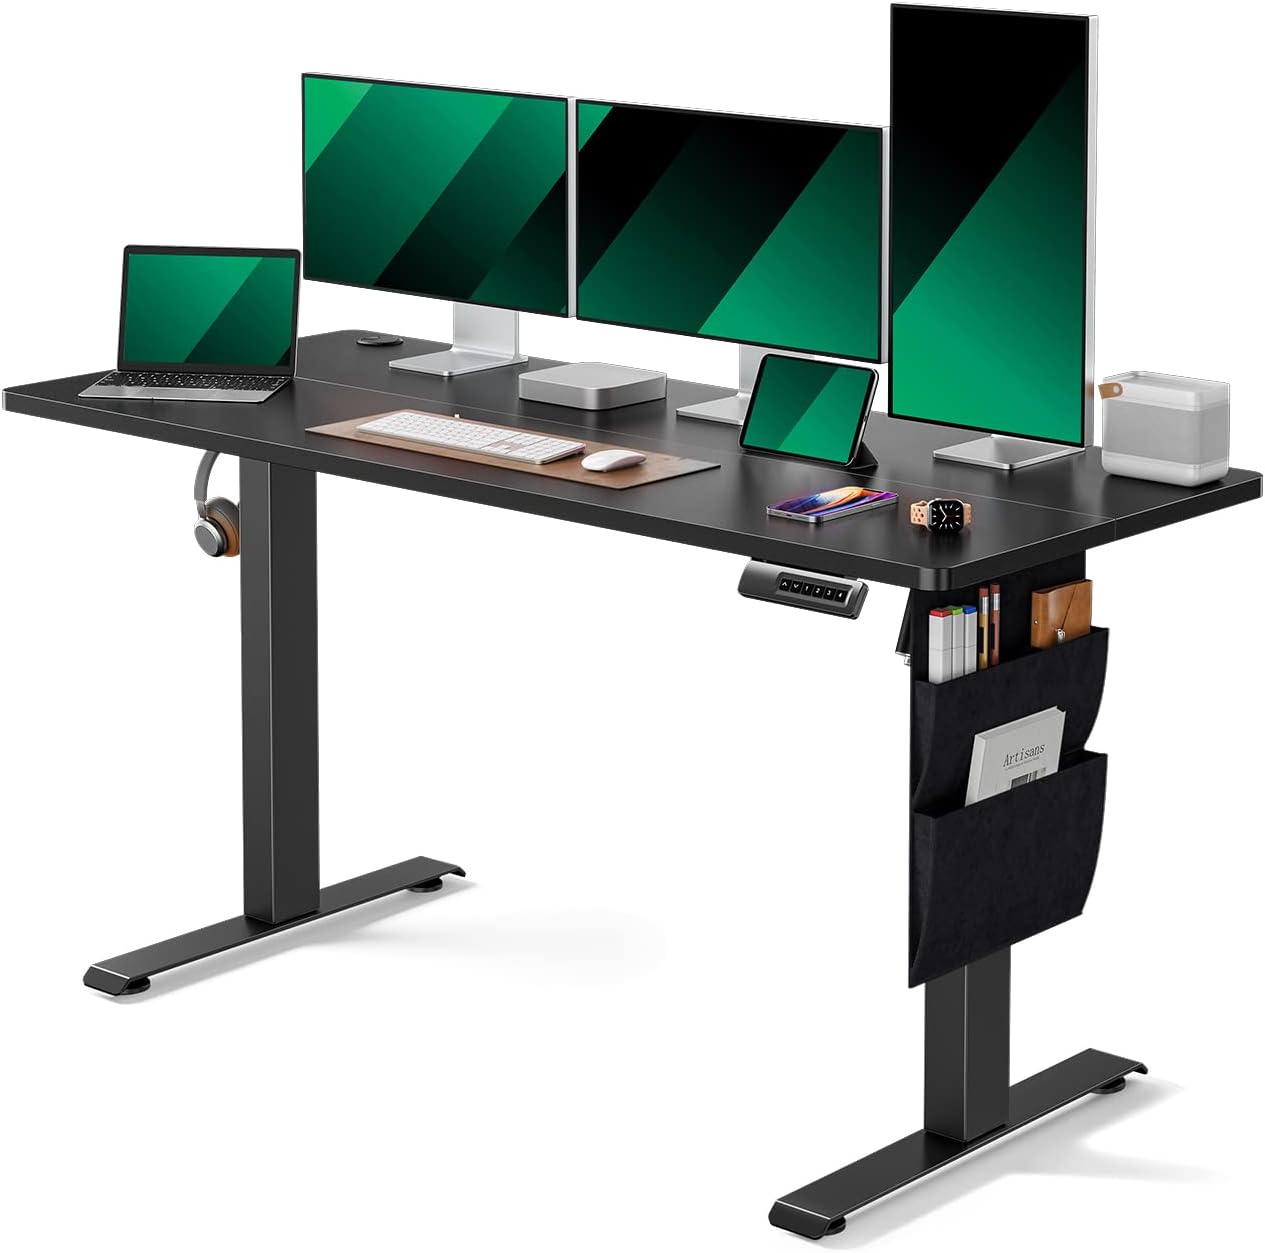 Electric Standing Desk Spotted Discounted by $100 on Amazon: Here's What Buyers can Expect